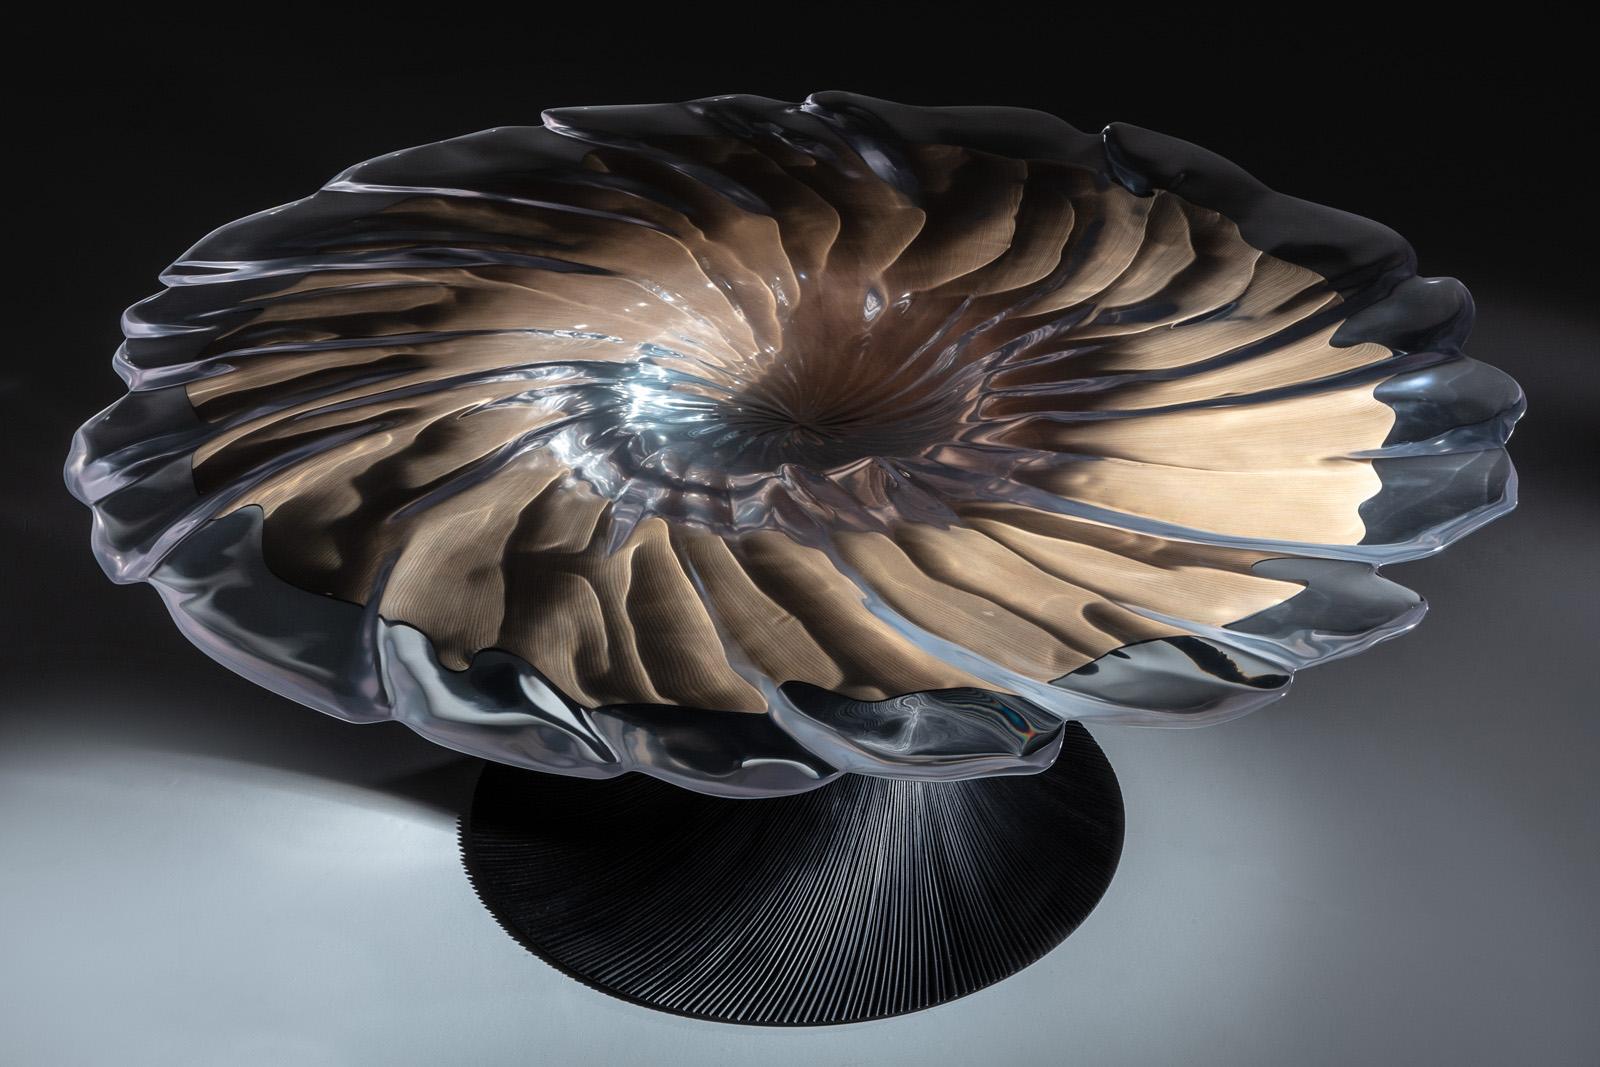 Vortex is a very special piece by Marc Fish. Hand crafted using thousands of pieces of veneer and poured resin in many stages which is then carved into to create movement and fluidity of Vortex.
The resin top is both crystal clear and has a flat